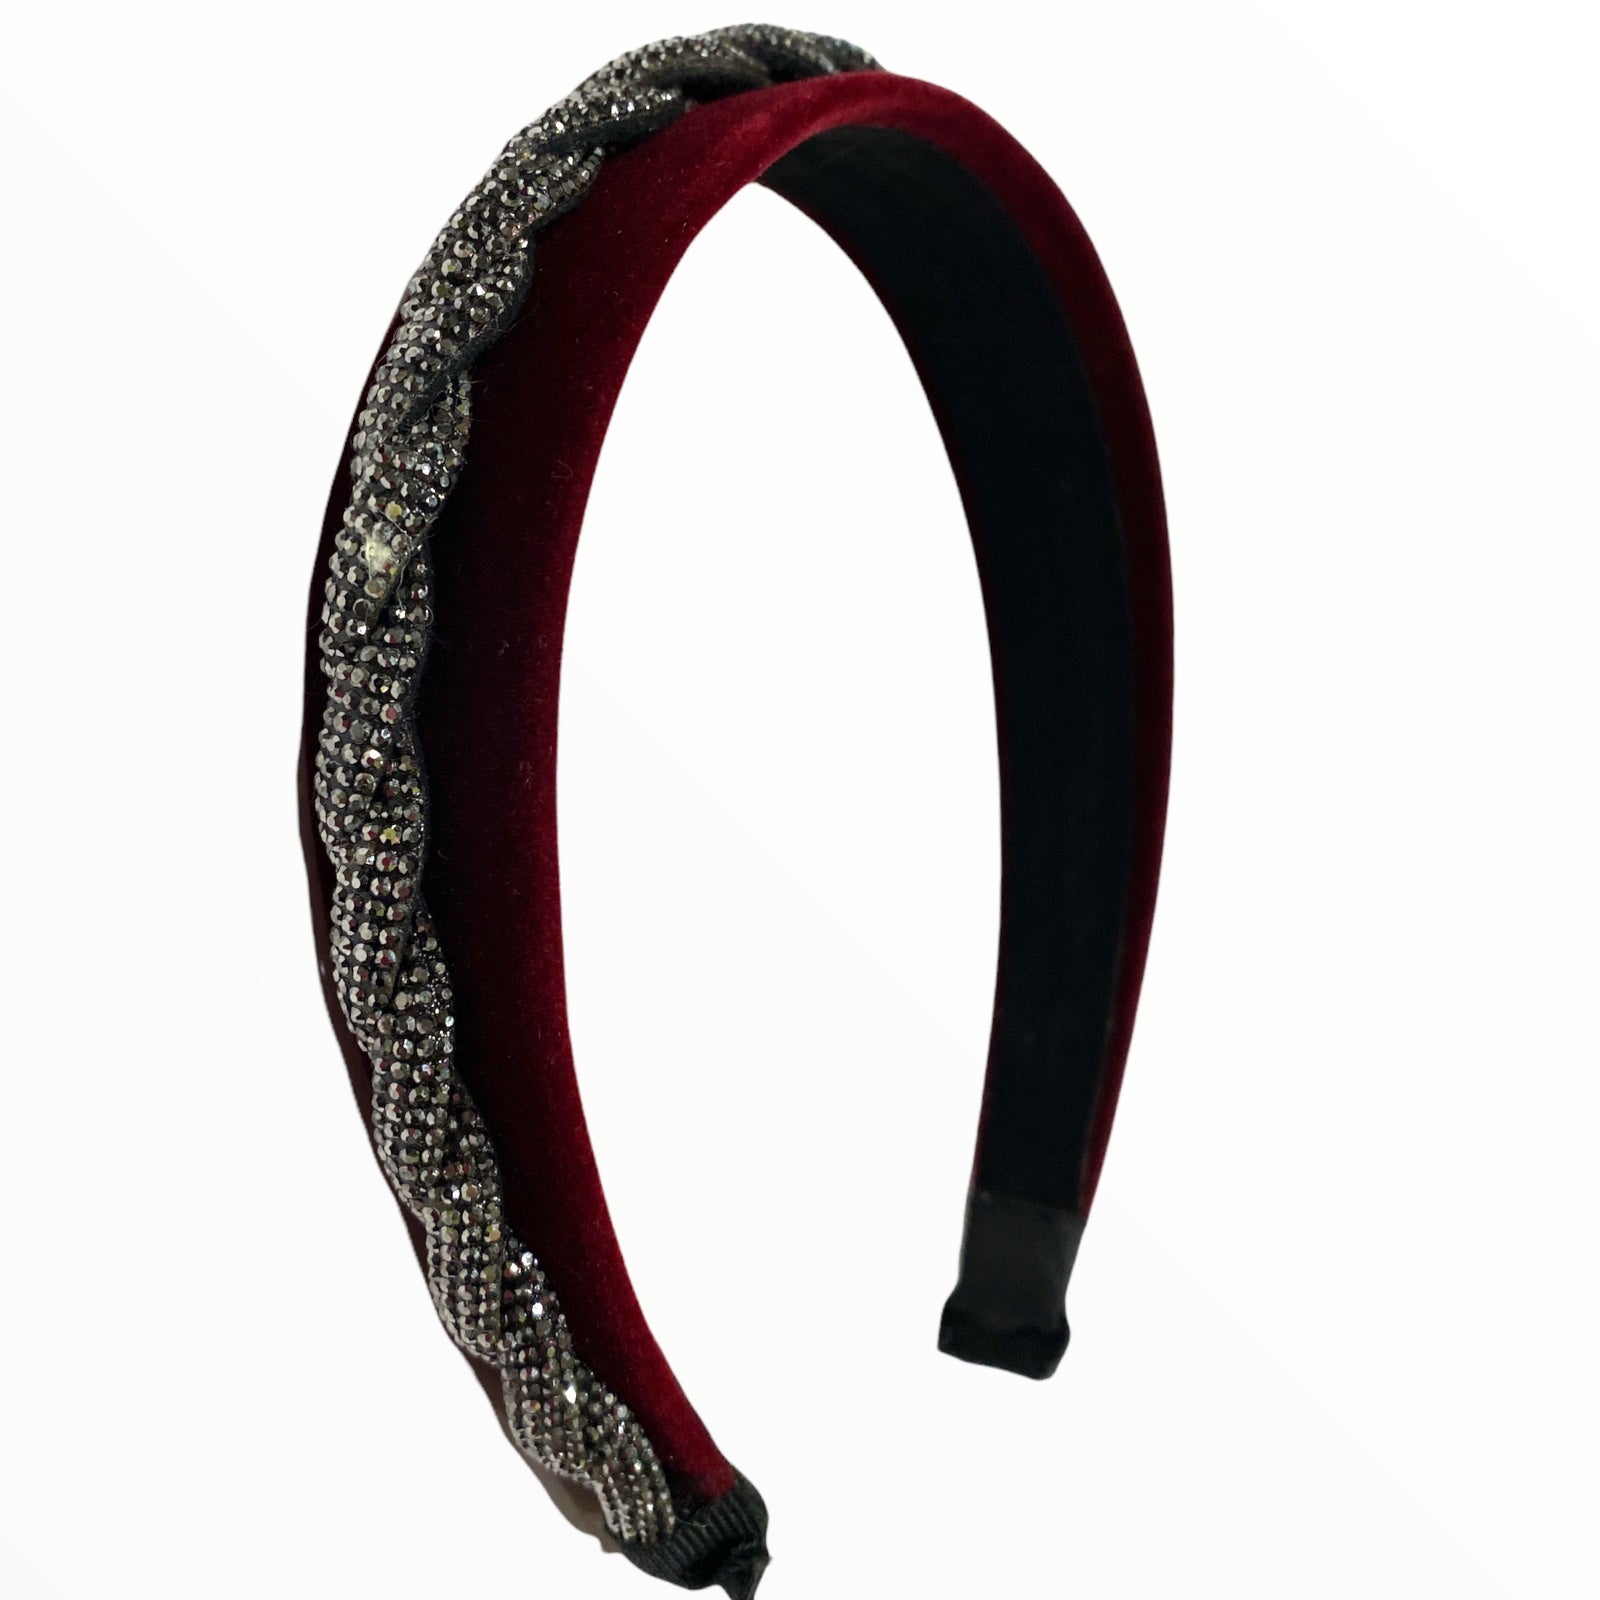 Red luxury hairband with crystals